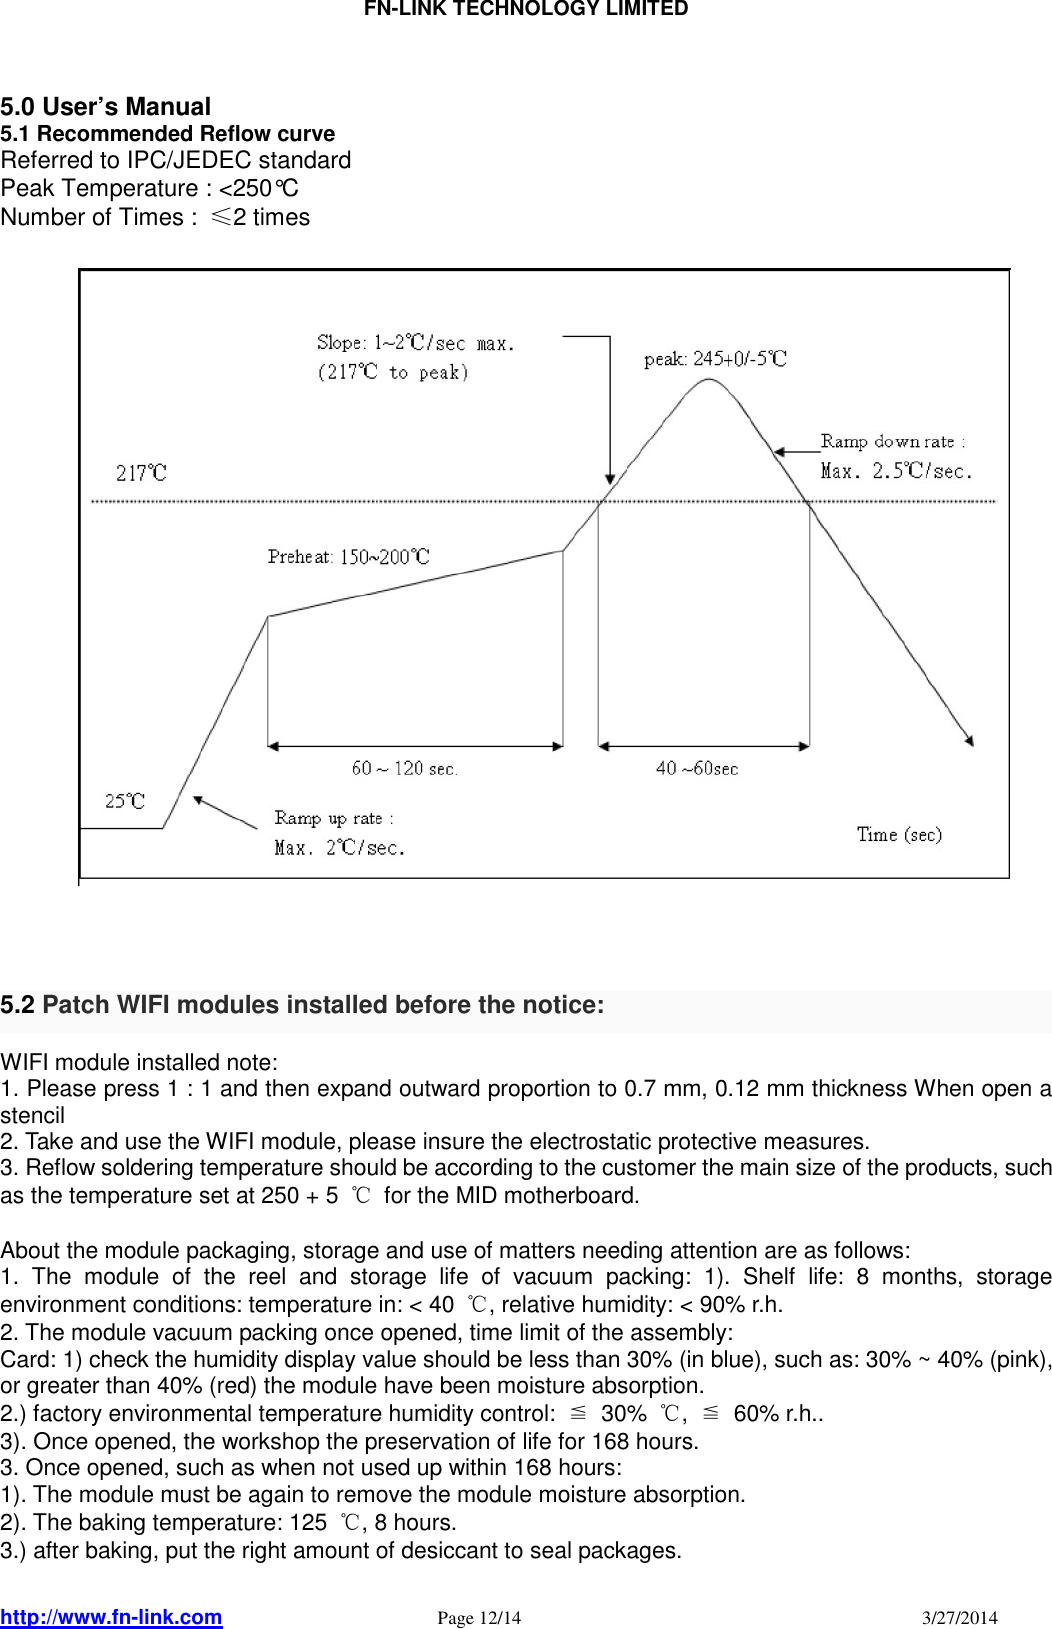                                FN-LINK TECHNOLOGY LIMITED http://www.fn-link.com   Page 12/14                                                                                    3/27/2014       5.0 User’s Manual 5.1 Recommended Reflow curve Referred to IPC/JEDEC standard Peak Temperature : &lt;250°C Number of Times :  ≤2 times                               5.2 Patch WIFI modules installed before the notice:   WIFI module installed note: 1. Please press 1 : 1 and then expand outward proportion to 0.7 mm, 0.12 mm thickness When open a stencil 2. Take and use the WIFI module, please insure the electrostatic protective measures. 3. Reflow soldering temperature should be according to the customer the main size of the products, such as the temperature set at 250 + 5  ℃  for the MID motherboard.  About the module packaging, storage and use of matters needing attention are as follows: 1.  The  module  of  the  reel  and  storage  life  of  vacuum  packing:  1).  Shelf  life:  8  months,  storage environment conditions: temperature in: &lt; 40  ℃, relative humidity: &lt; 90% r.h. 2. The module vacuum packing once opened, time limit of the assembly: Card: 1) check the humidity display value should be less than 30% (in blue), such as: 30% ~ 40% (pink), or greater than 40% (red) the module have been moisture absorption. 2.) factory environmental temperature humidity control:  ≦  30%  ℃,  ≦  60% r.h.. 3). Once opened, the workshop the preservation of life for 168 hours. 3. Once opened, such as when not used up within 168 hours: 1). The module must be again to remove the module moisture absorption. 2). The baking temperature: 125  ℃, 8 hours. 3.) after baking, put the right amount of desiccant to seal packages.  